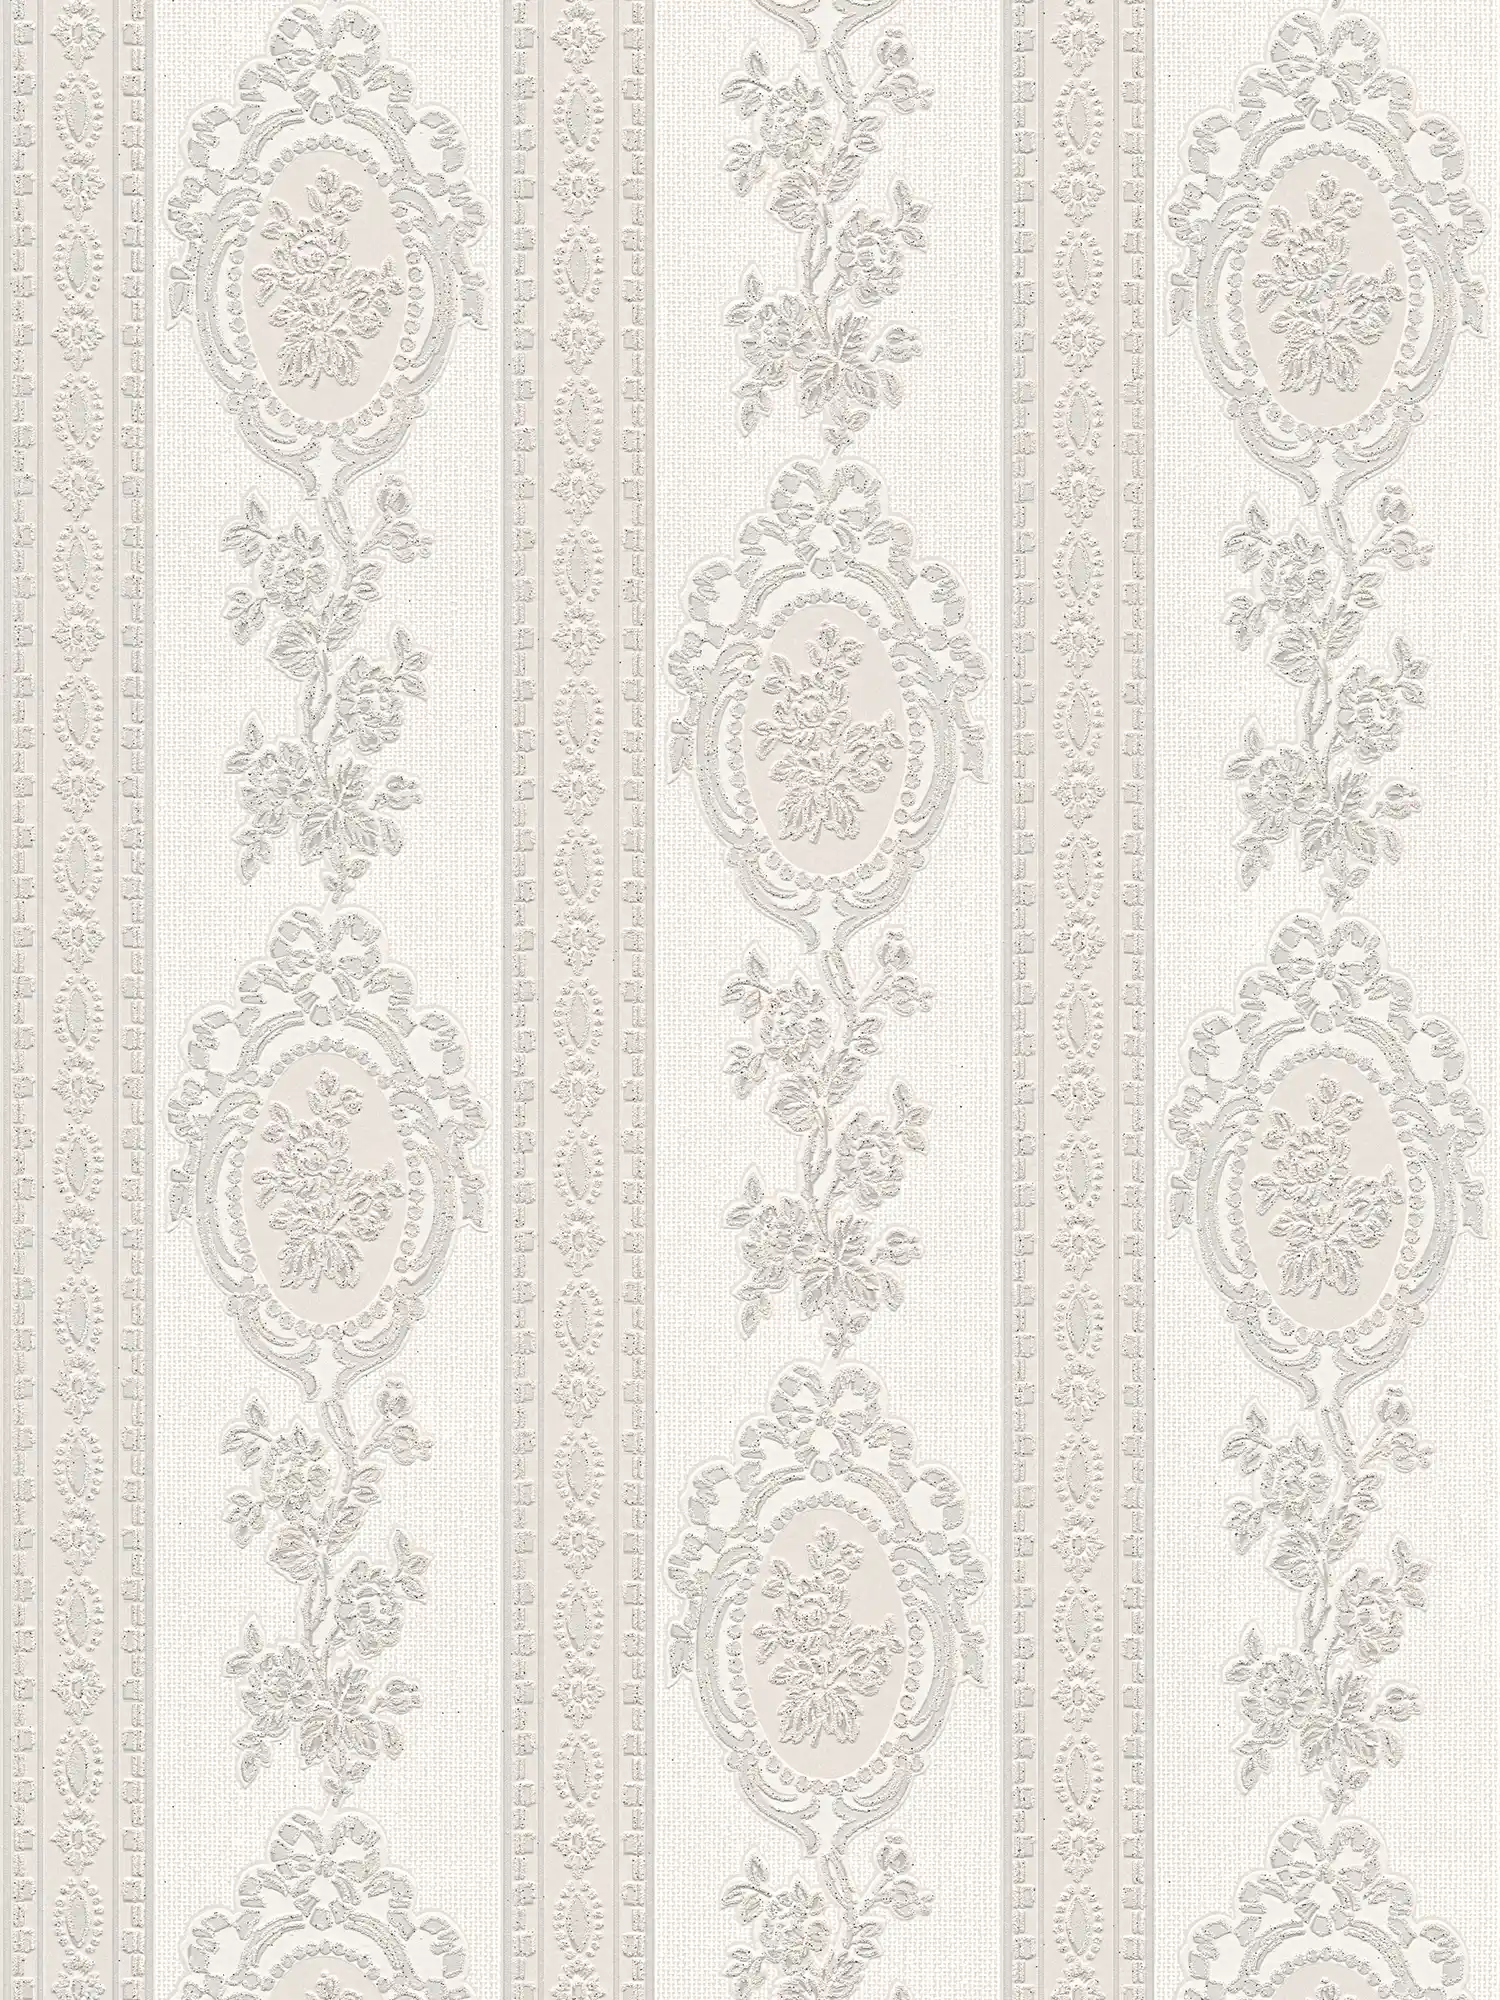 Ornamental wallpaper floral elements, stripes and flowers - grey, white, silver
